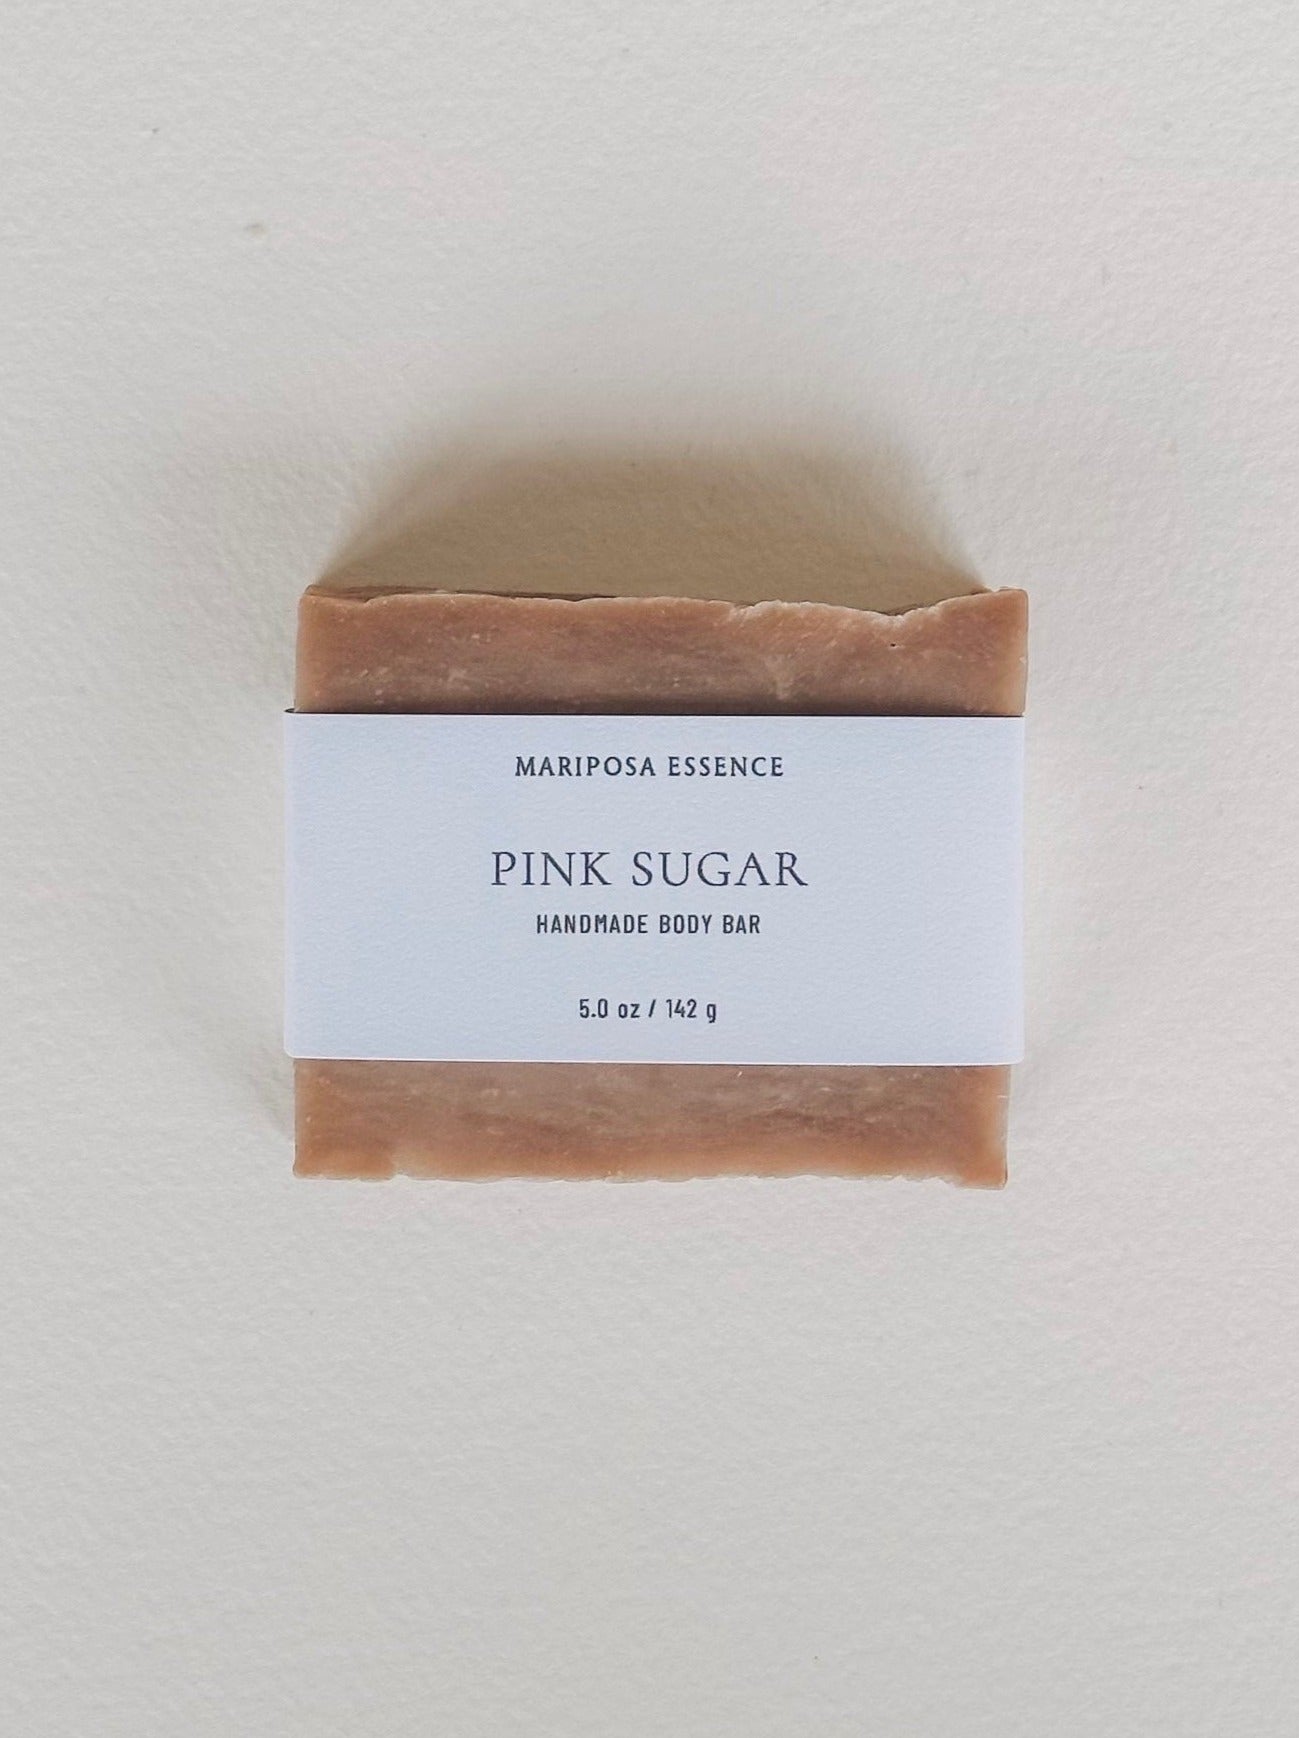 Soaps and Butters VIP Group - Pink Sugar fragrance oil is a sweet, sexy and  yummy feminine scent for all ages. Our Perfume Fragrance Body Oils.  #perfume #bodyspray #naturalproducts #sale #freeshipping #soapsandbutters #